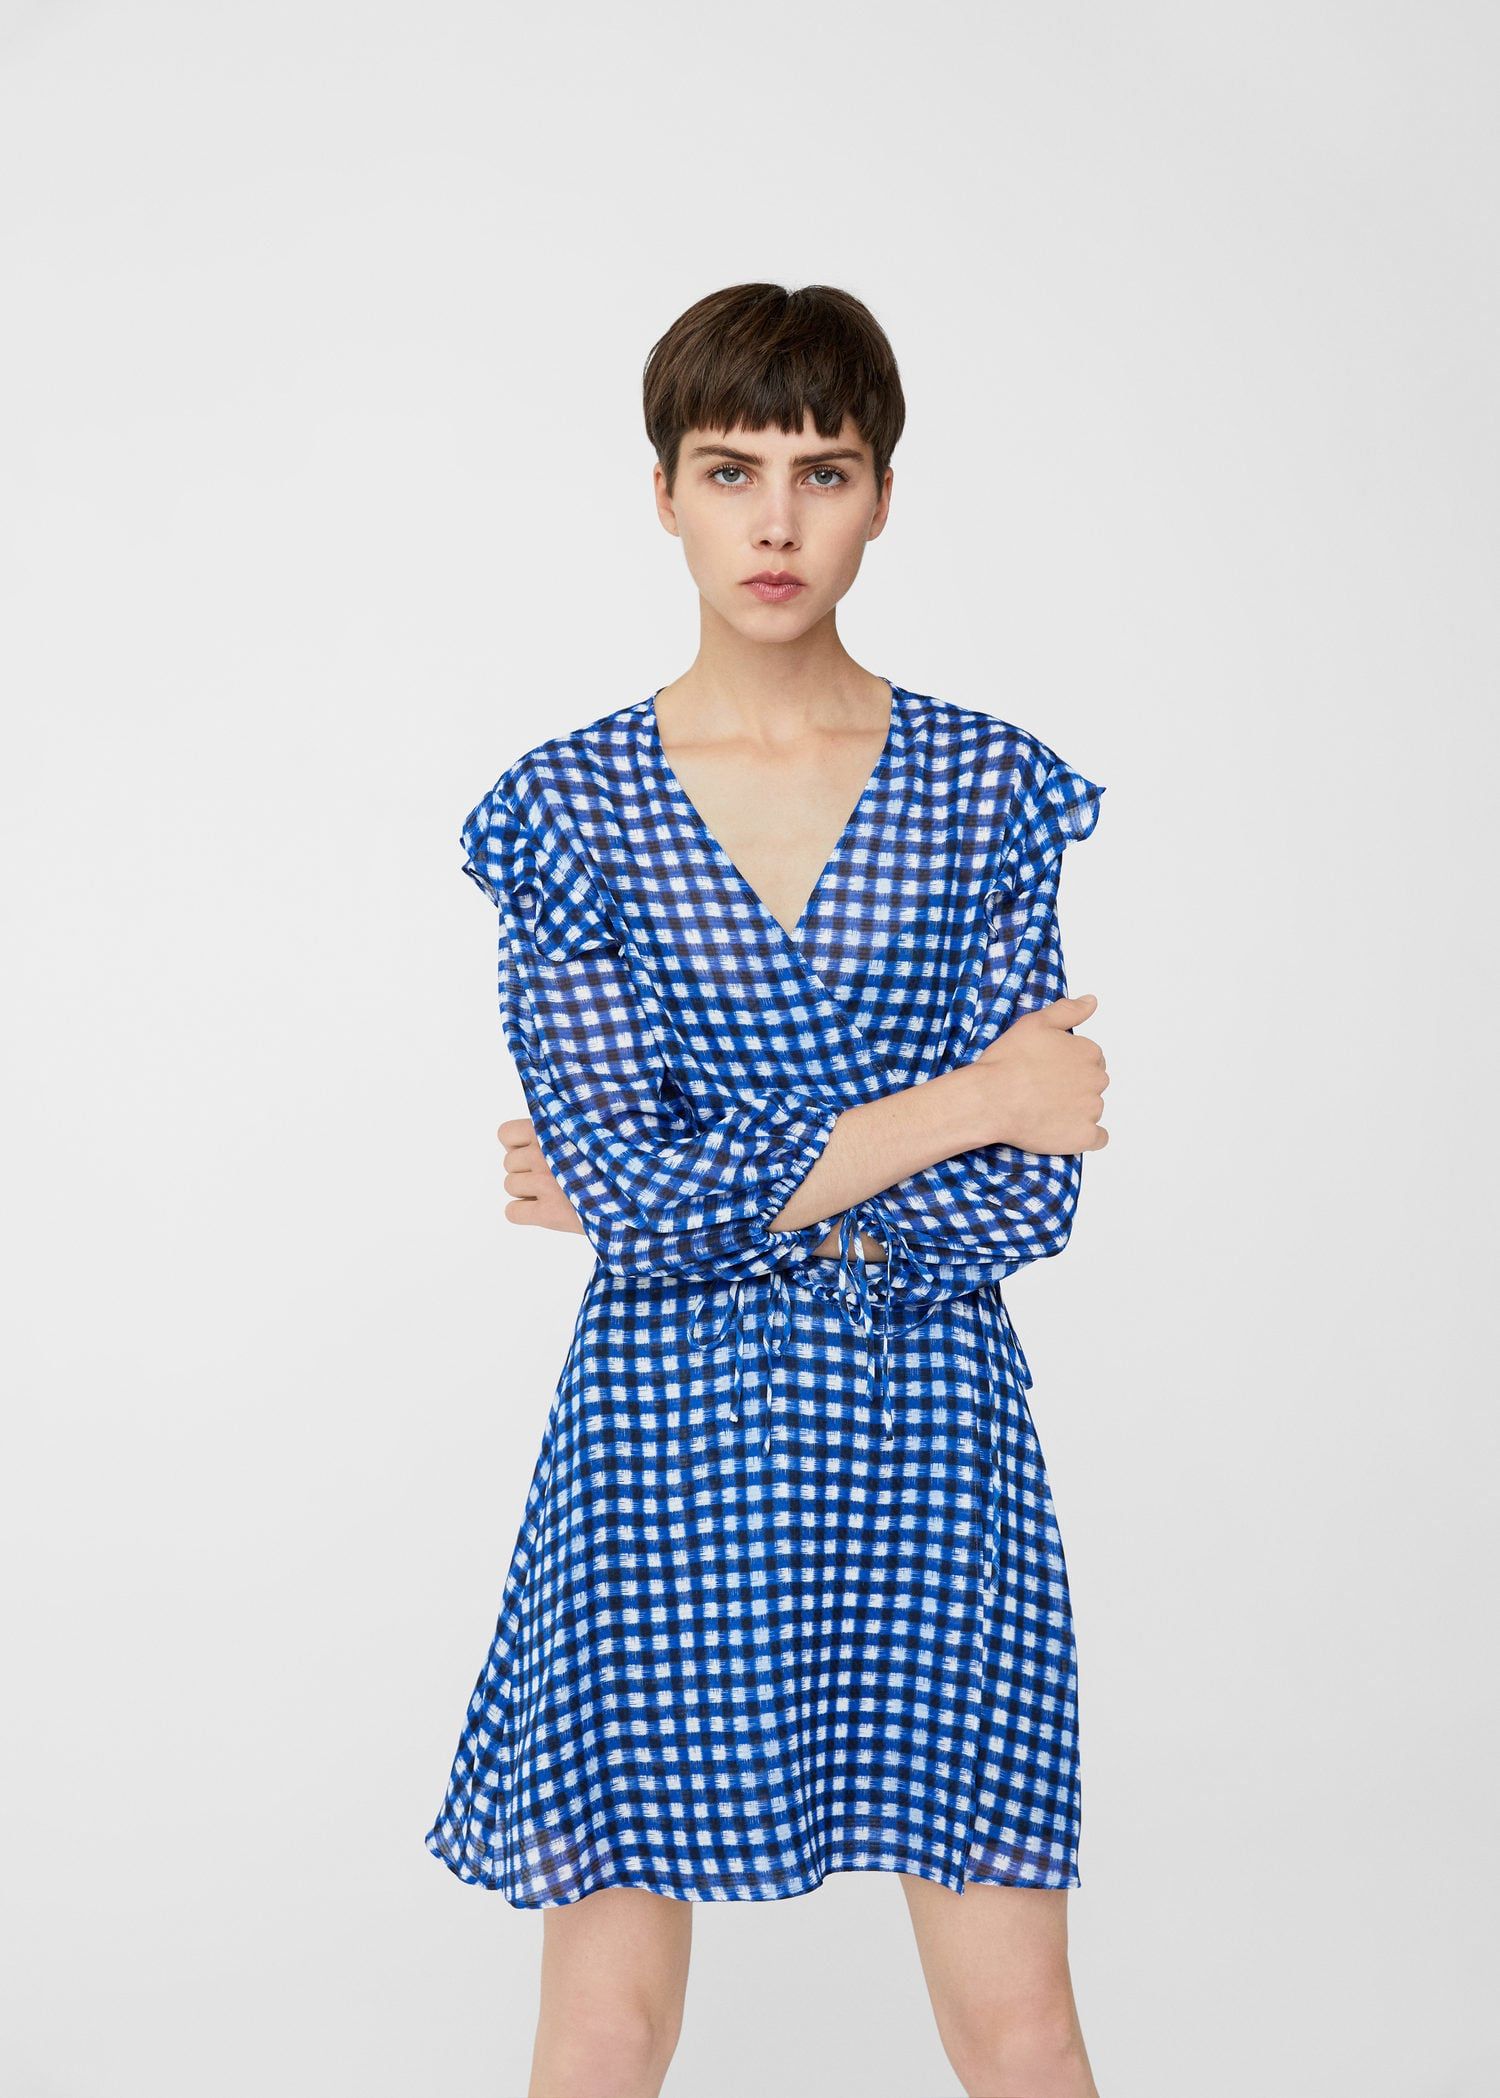 22 dresses to buy now that summer clothing is on sale